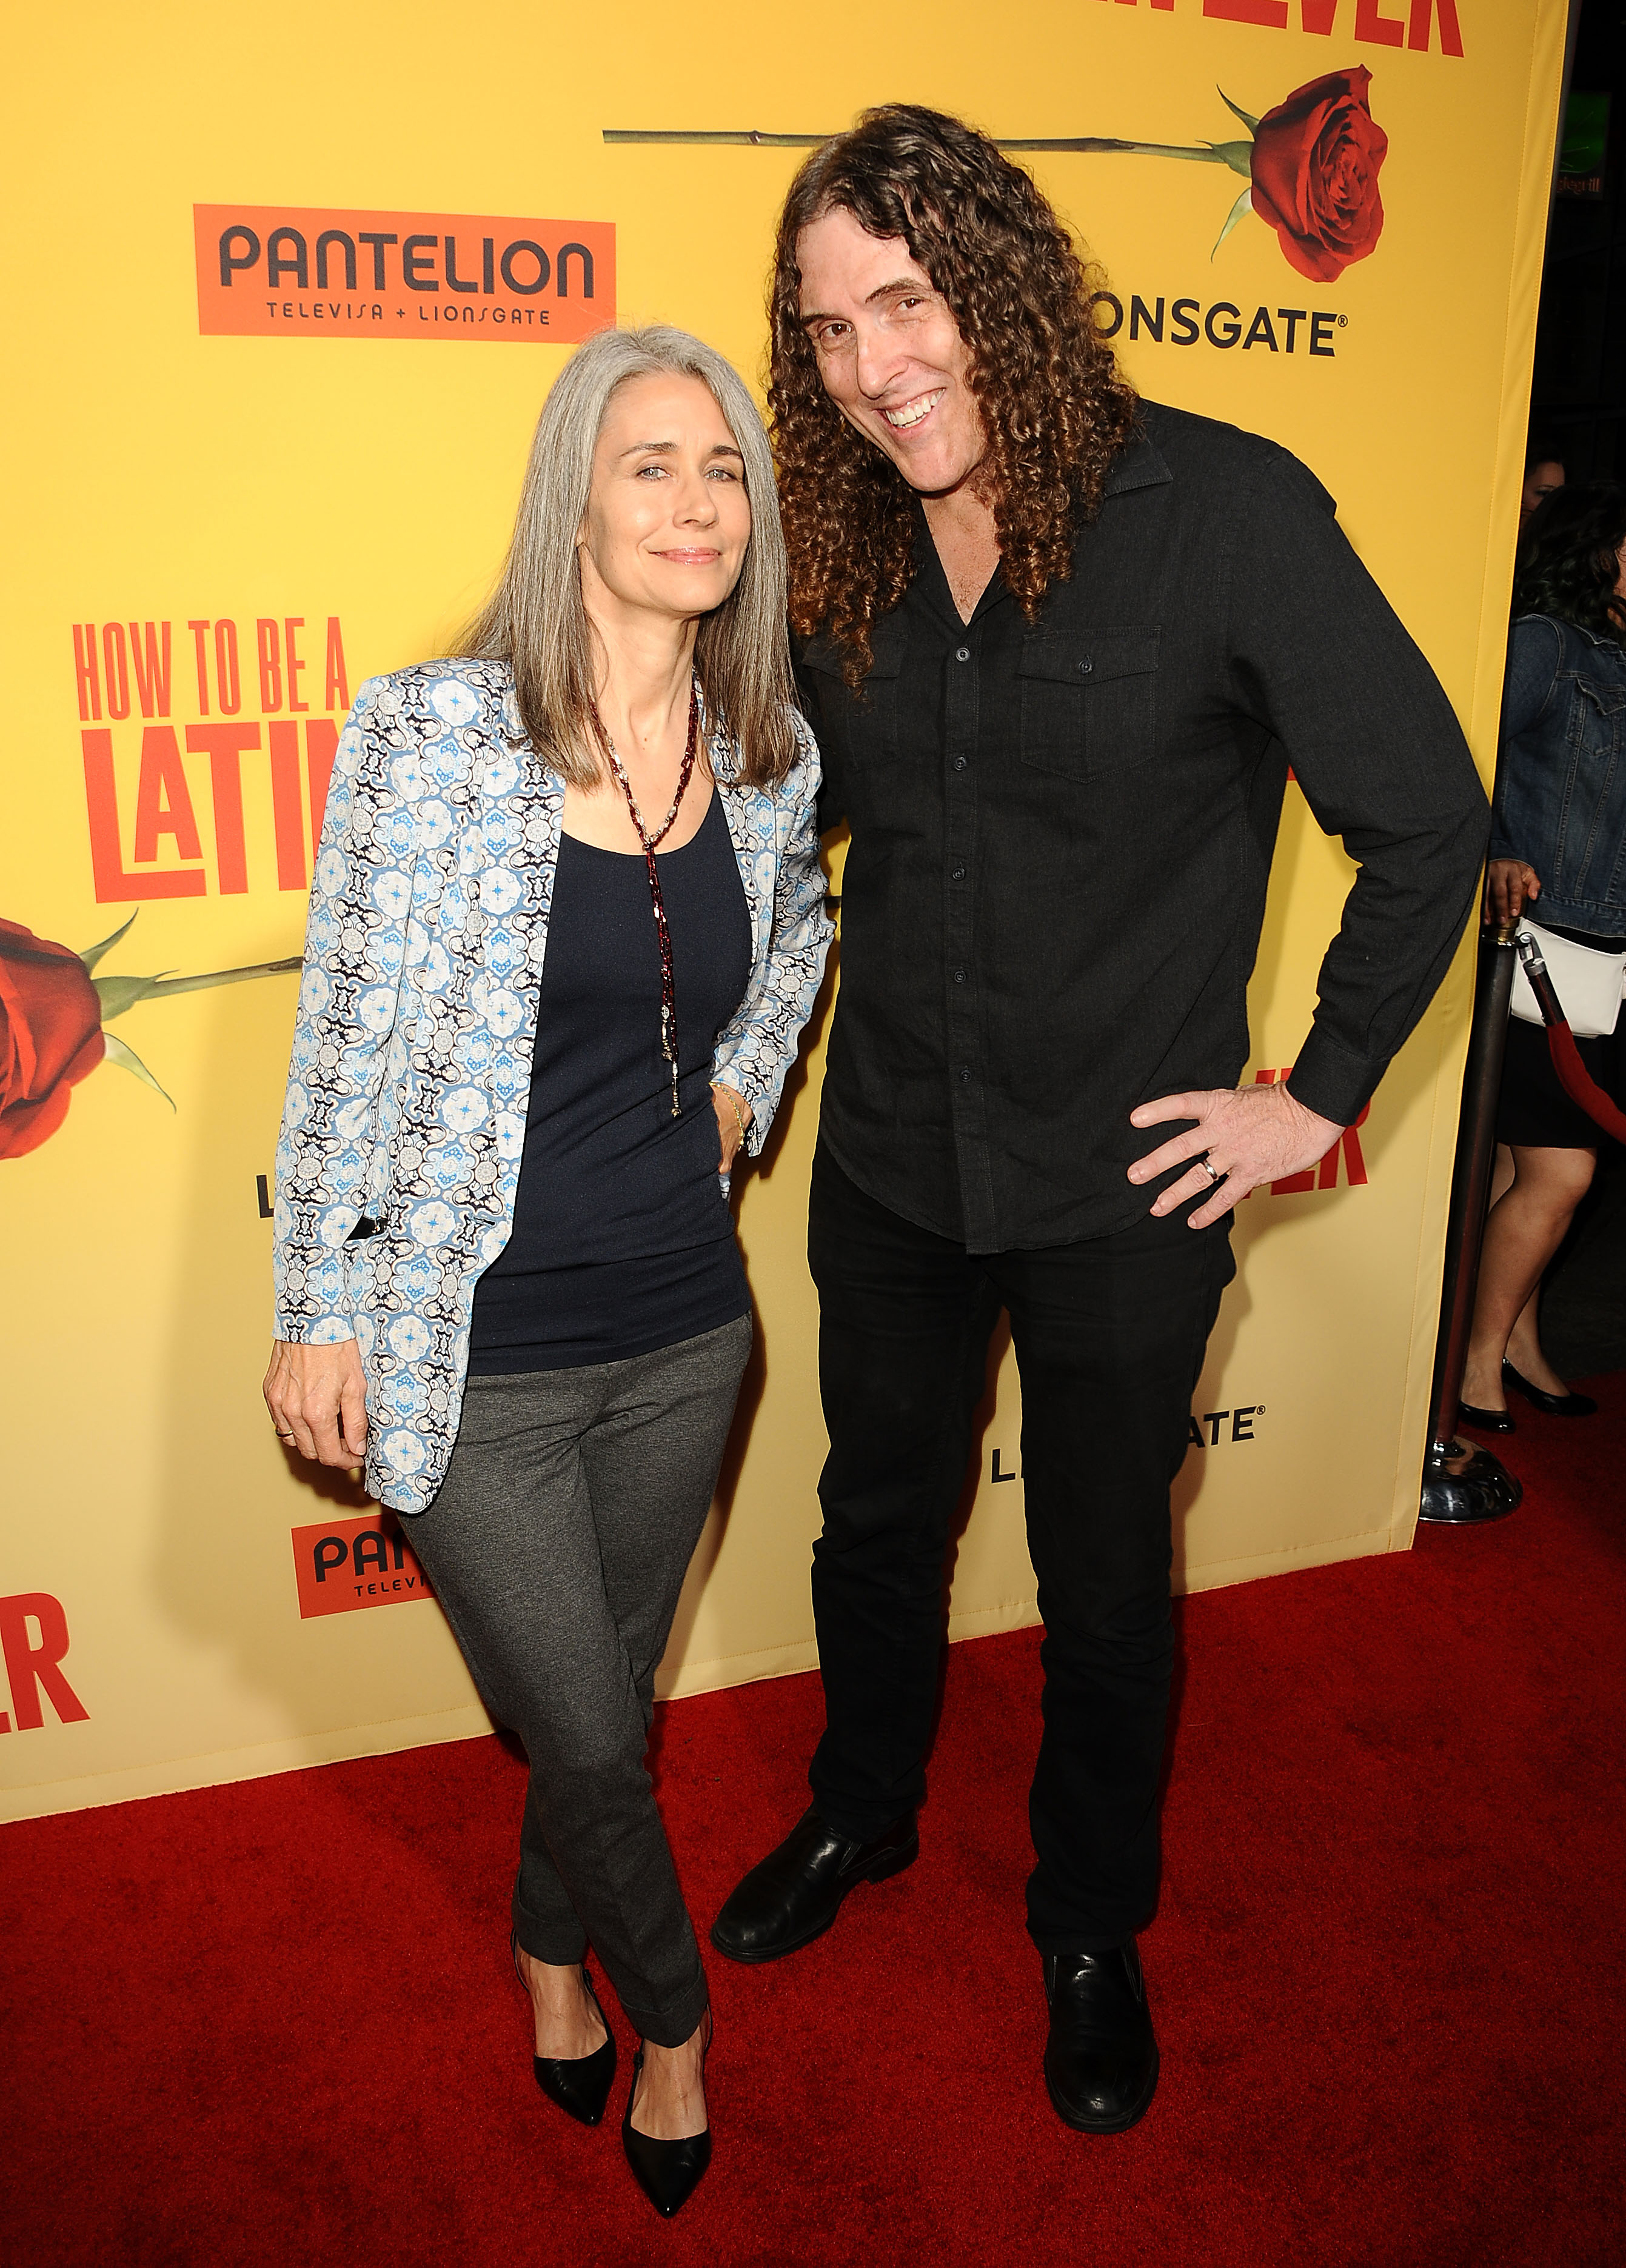 "Weird Al" Yankovic and Suzanne Yankovic at the premiere of "How to Be a Latin Lover" on April 26, 2017, in Hollywood, California. | Source: Getty Images